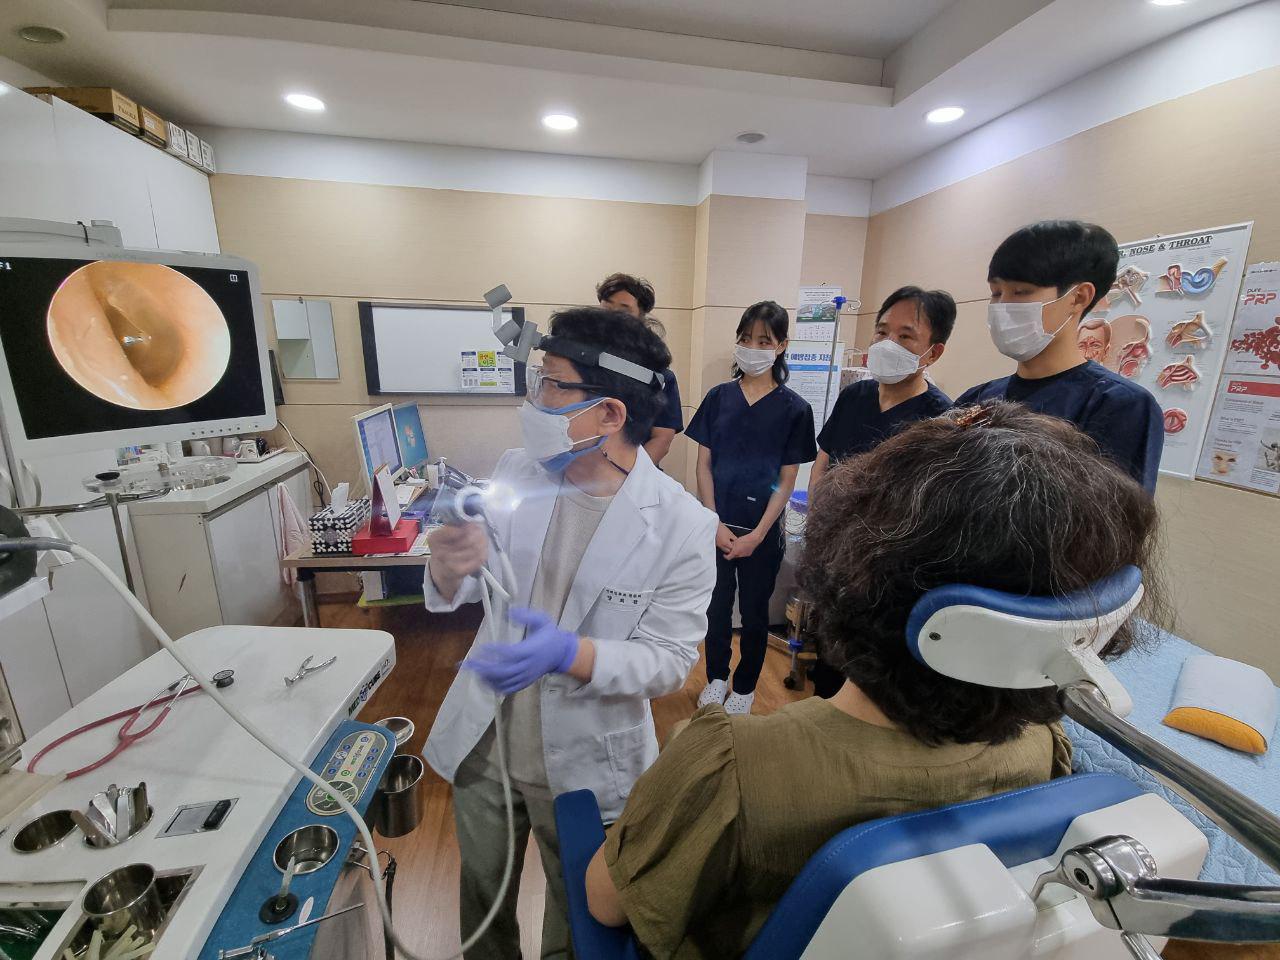 SOUTH KOREAN STUDENTS HAVE THEIR PRACTICAL TRAINING